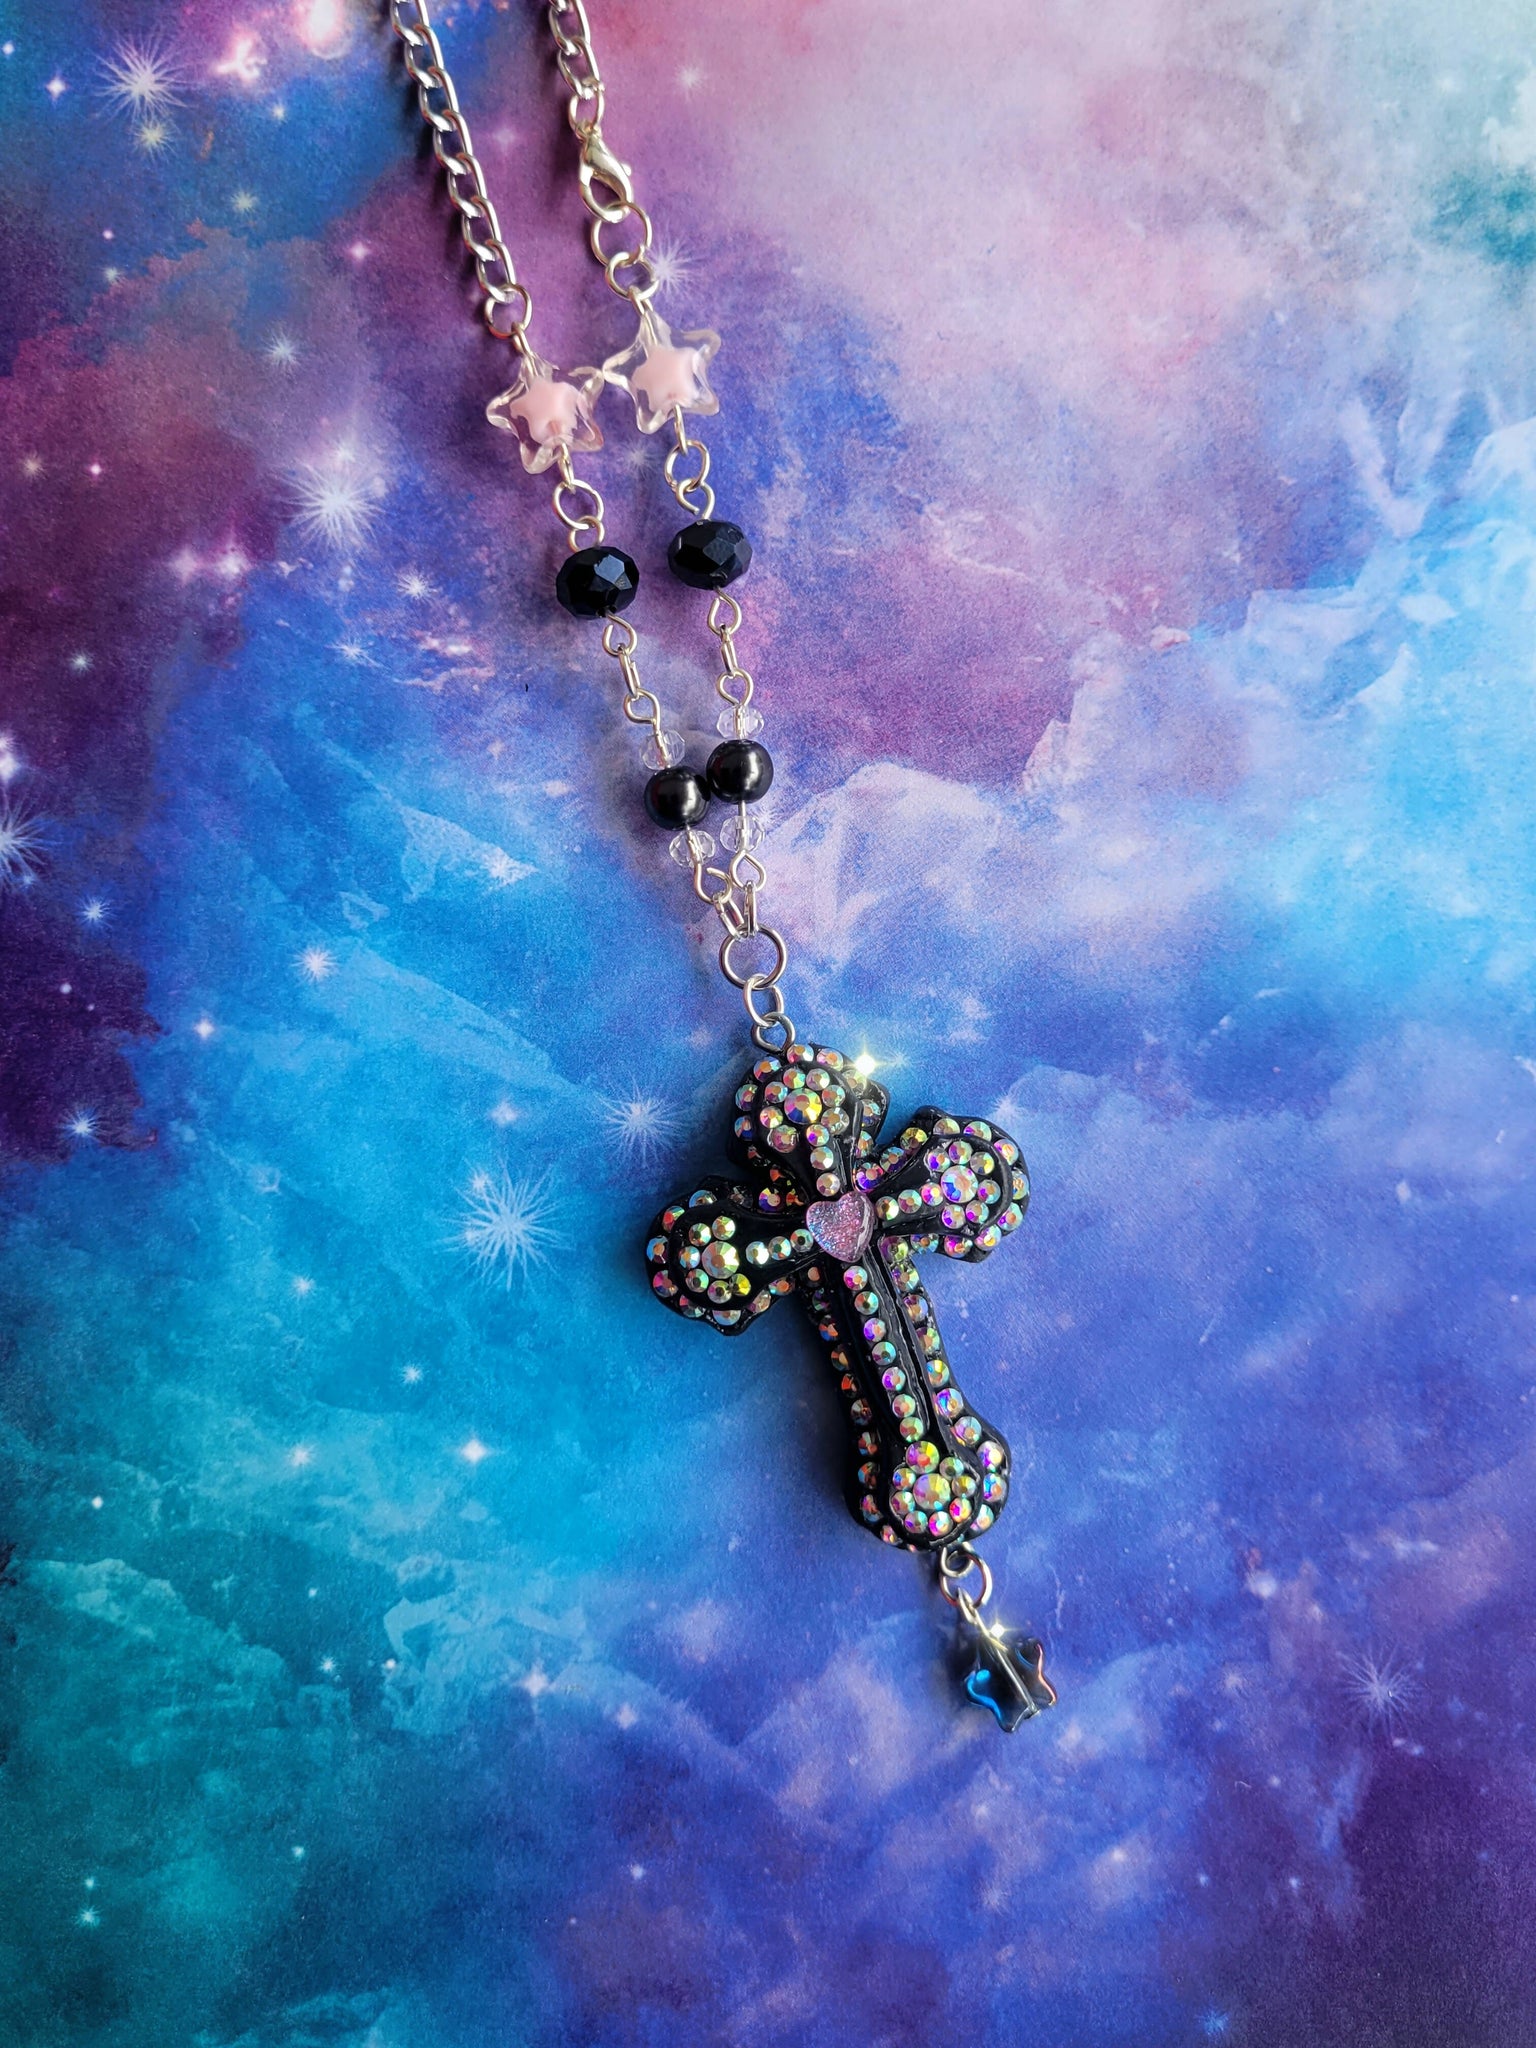 Ornate Gothic Cross Necklace - Ready to Ship